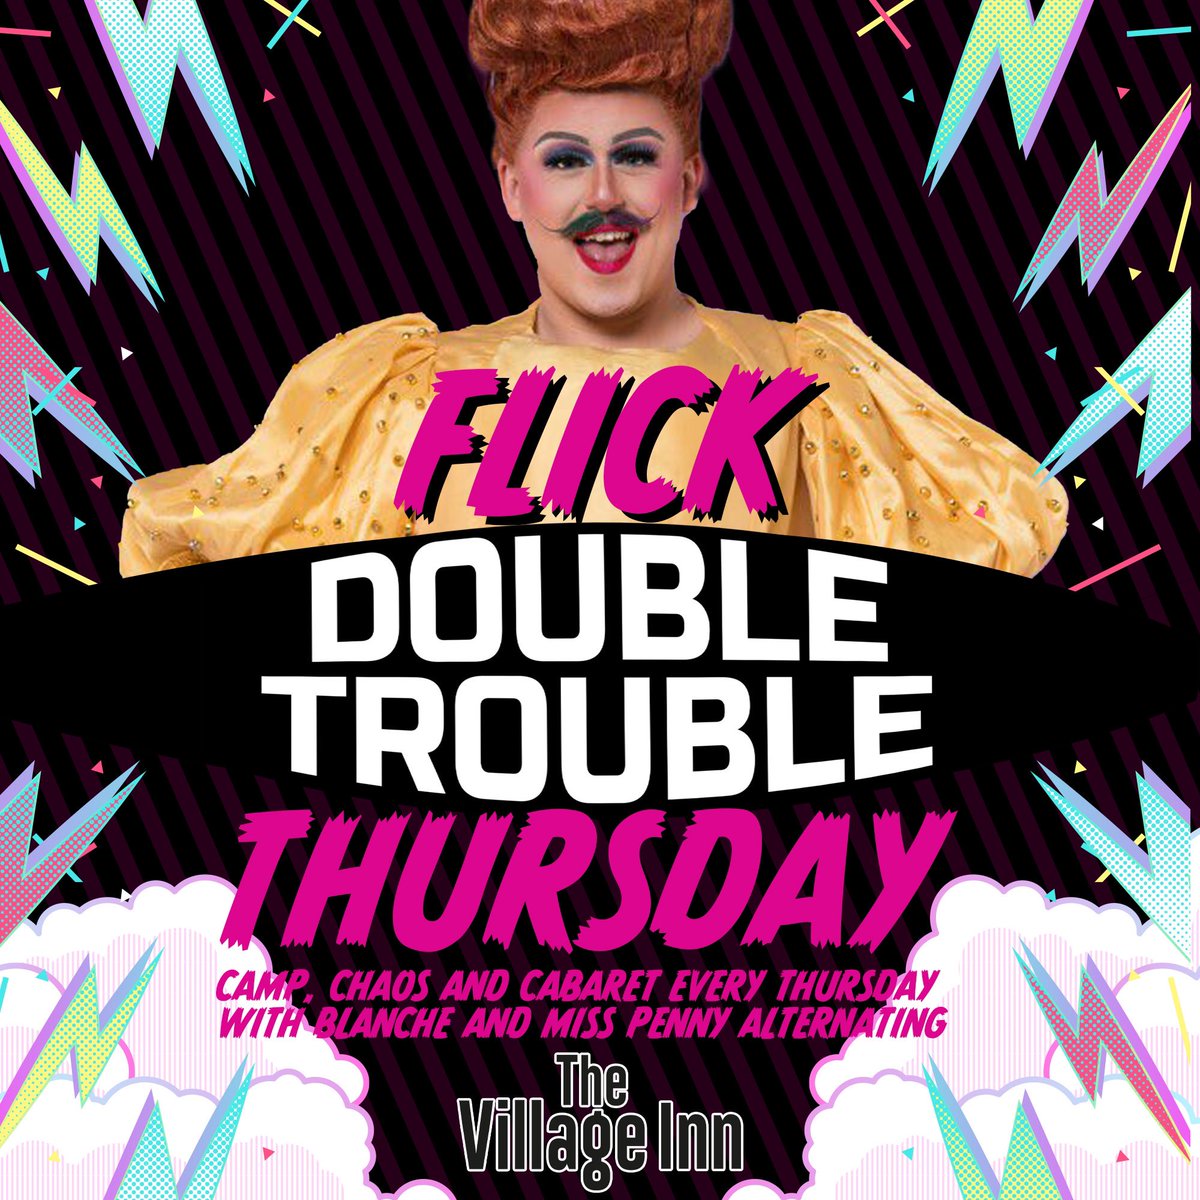 FLICK INTO THURSDAY! 👠 💄 We’re back with more ‘Double Trouble’ cabaret TOMORROW night at the @VillageBrum to get your weekend started early! Join us from 7pm with BUY ONE GET ONE FREE on ALL DRINKS until 9.30pm, with the fabulous @Flickthedrag on stage LIVE at 12 midnight!